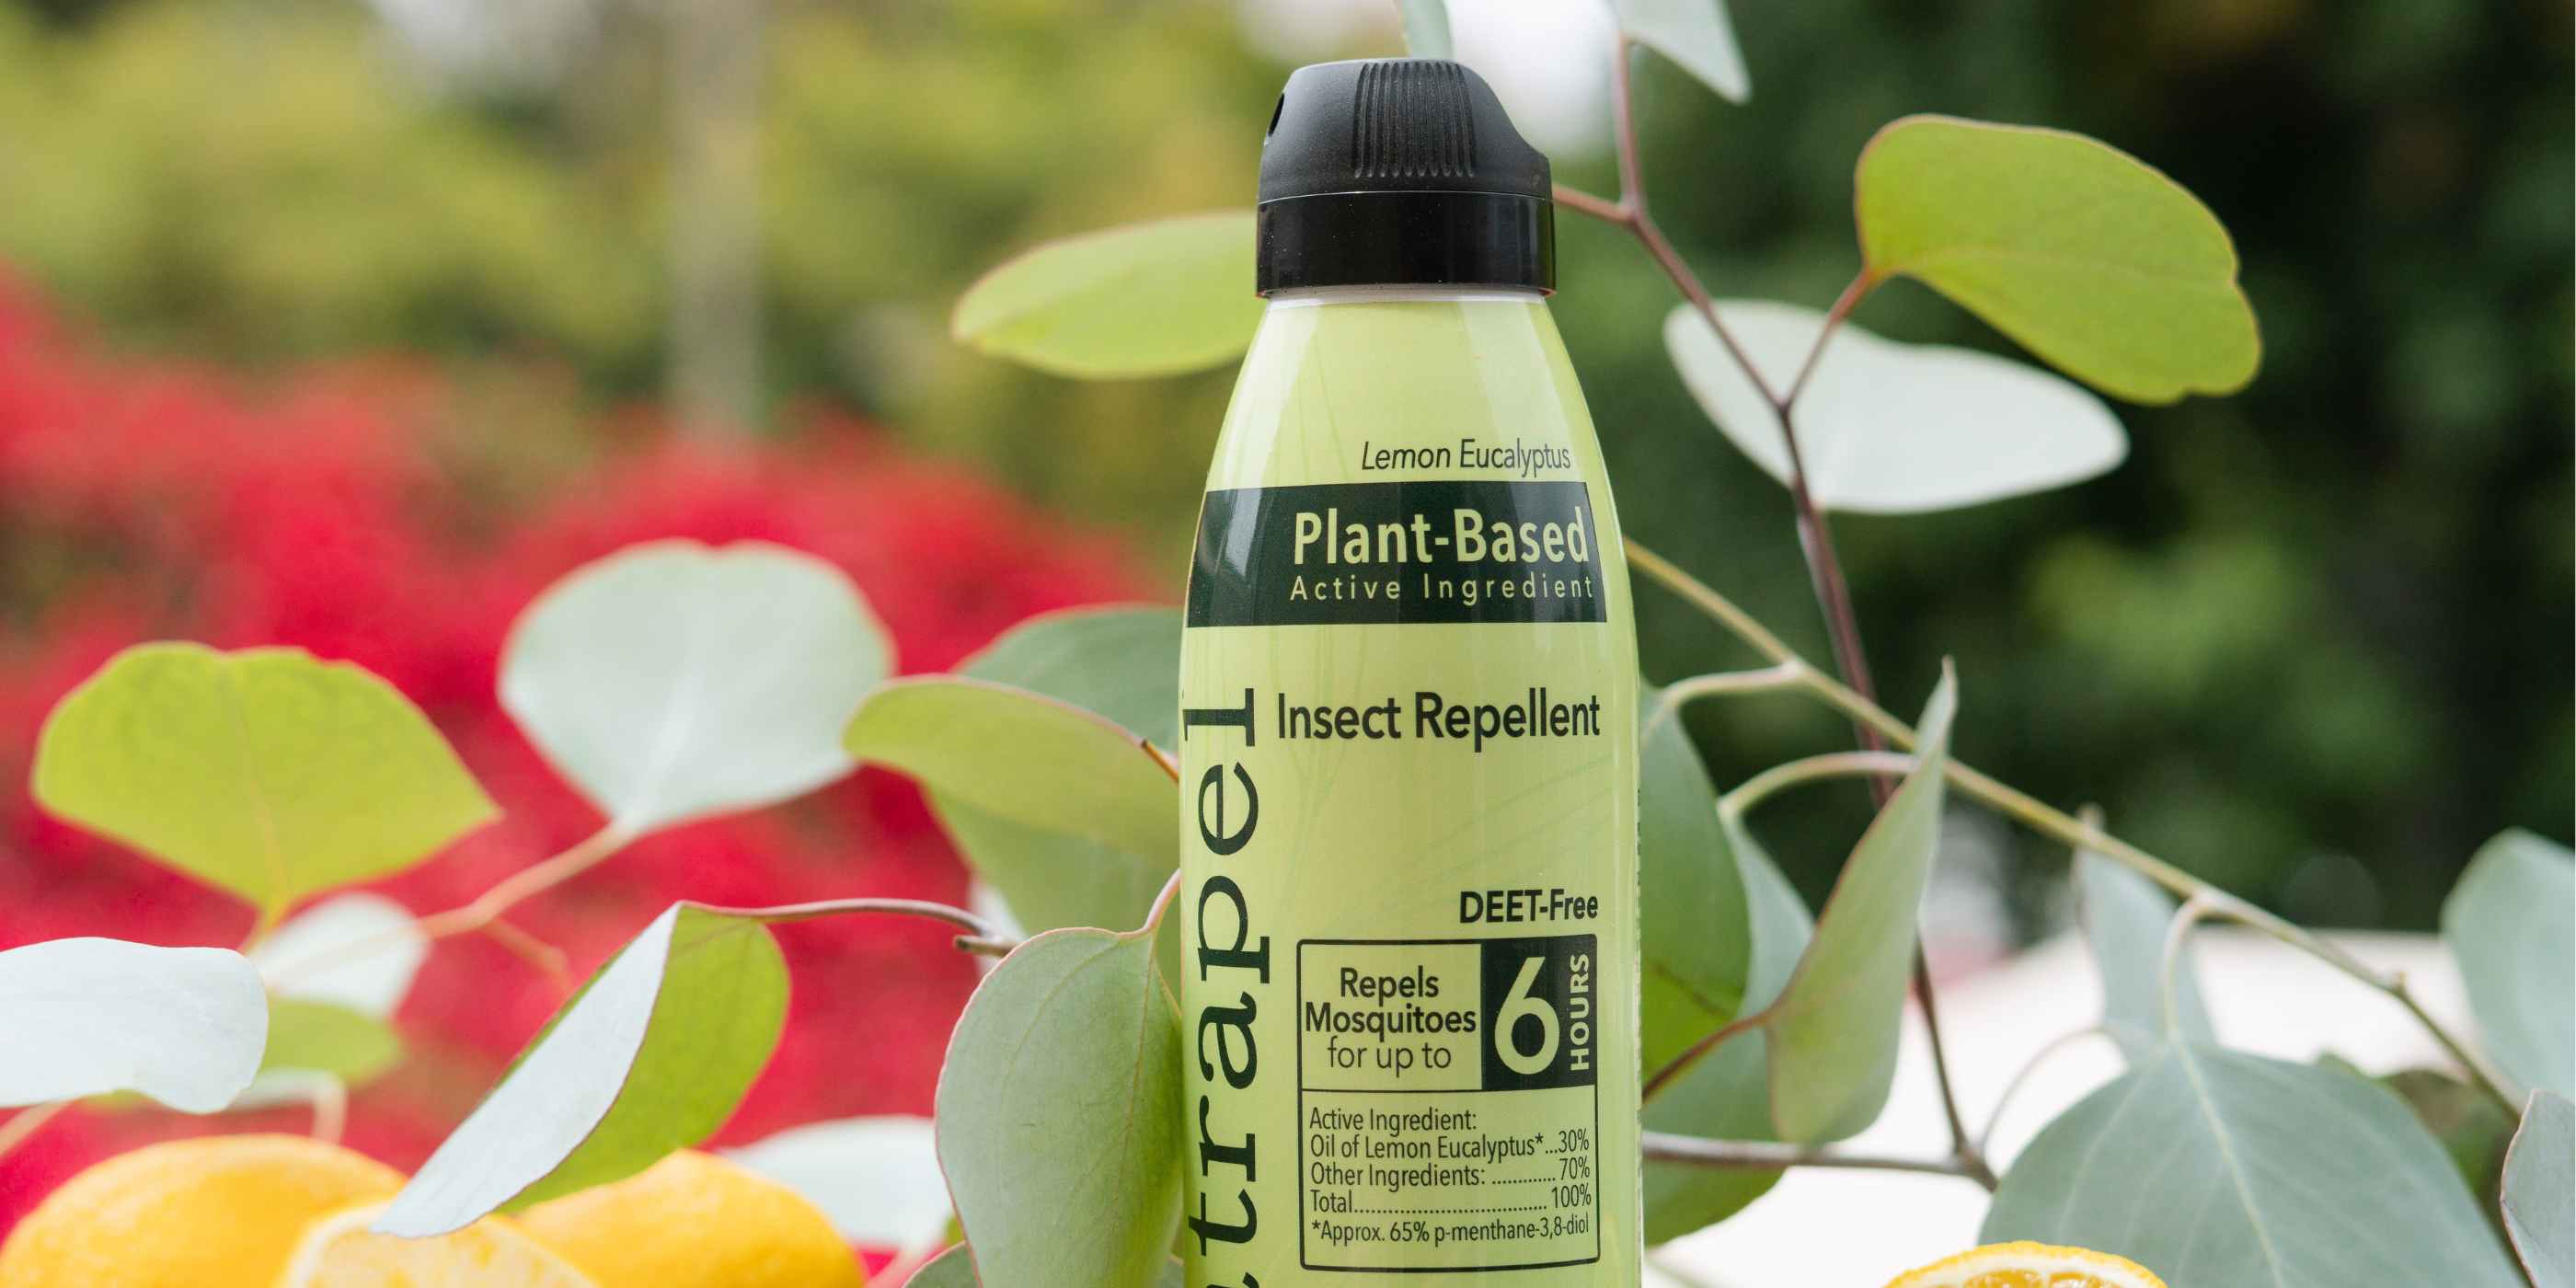 Natrapel Lemon Eucalyptus Plant Based Insect Repellent 6 oz. placed in front of lemons and eucalyptus leaves